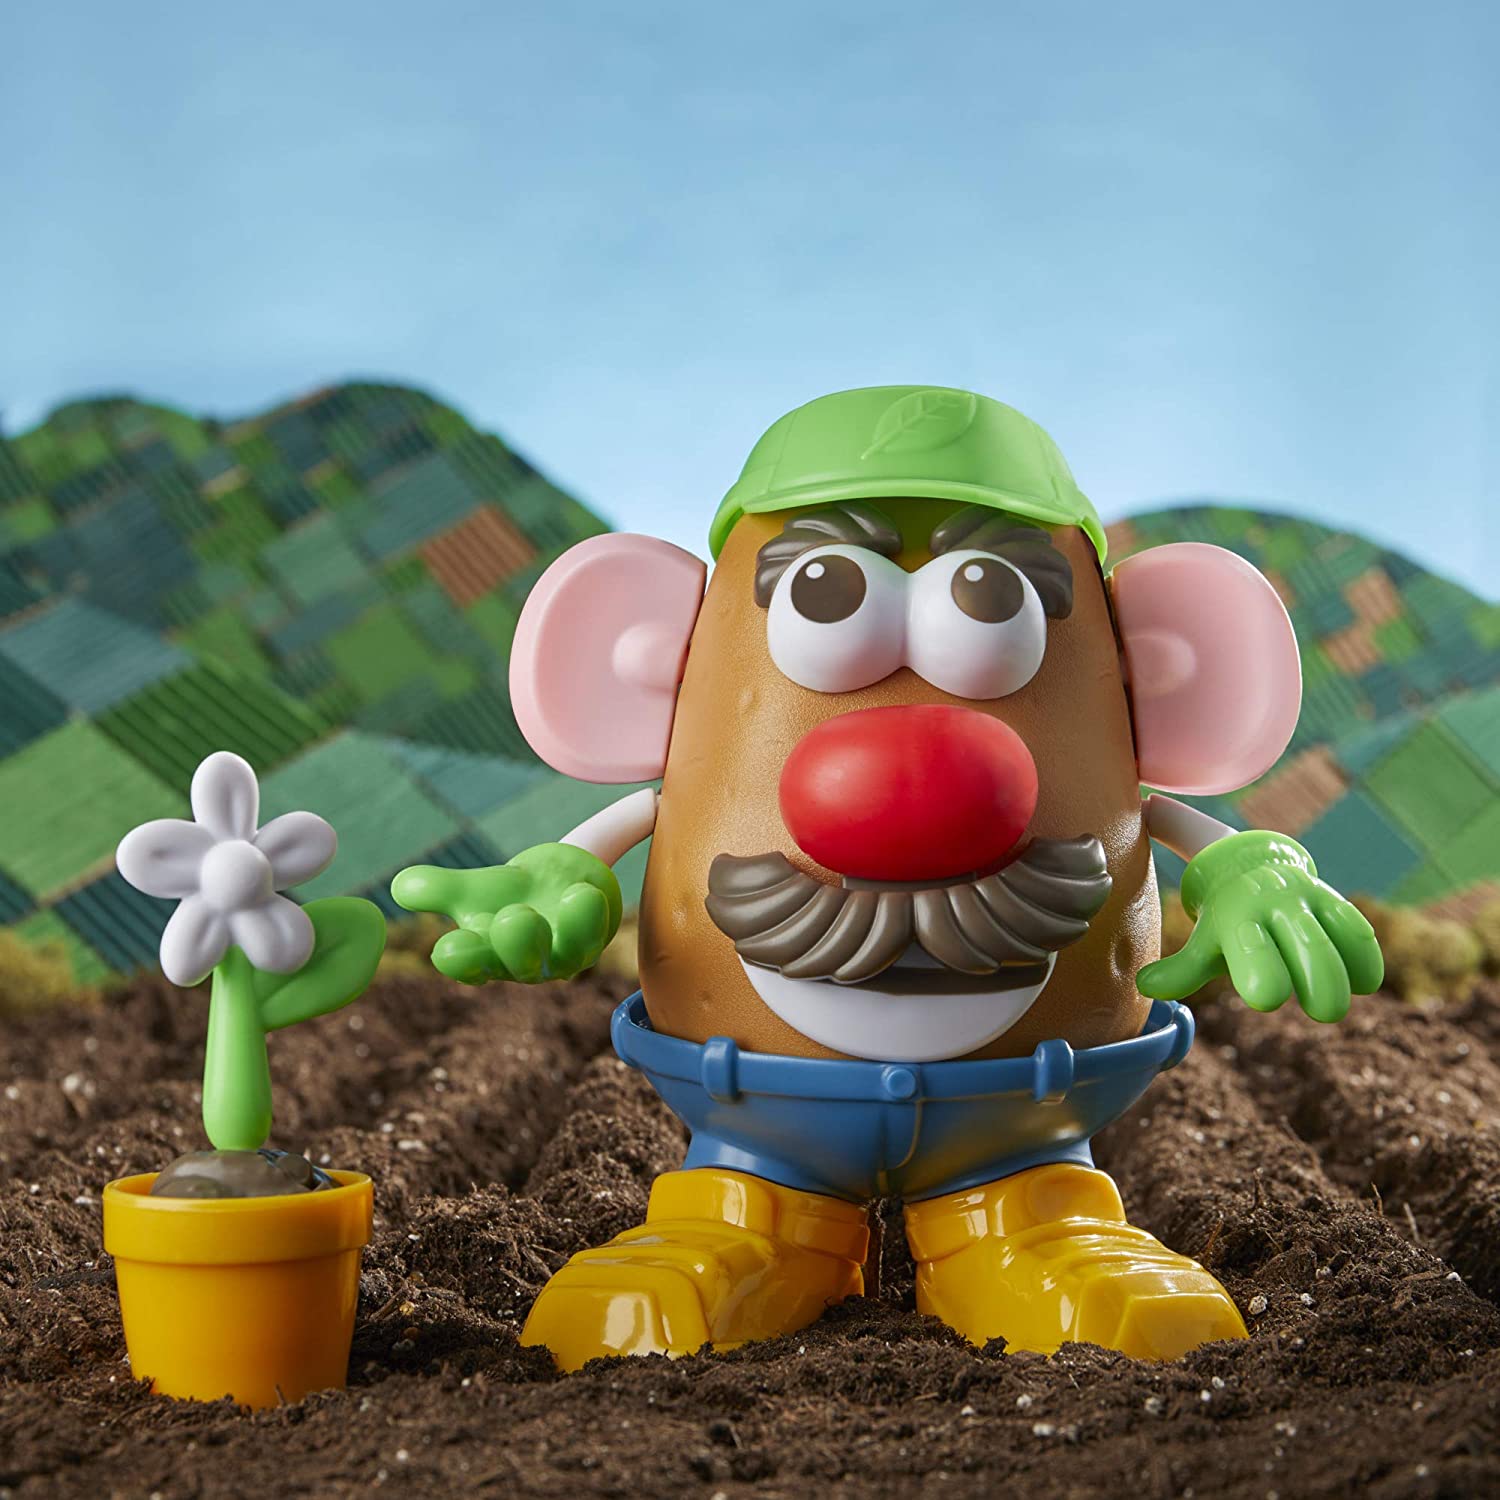 Mr Potato Head Goes Green Toy for Kids Ages 3 and up, Made with Plant-Based Plastic and FSC-Certified Paper Packaging - image 3 of 7